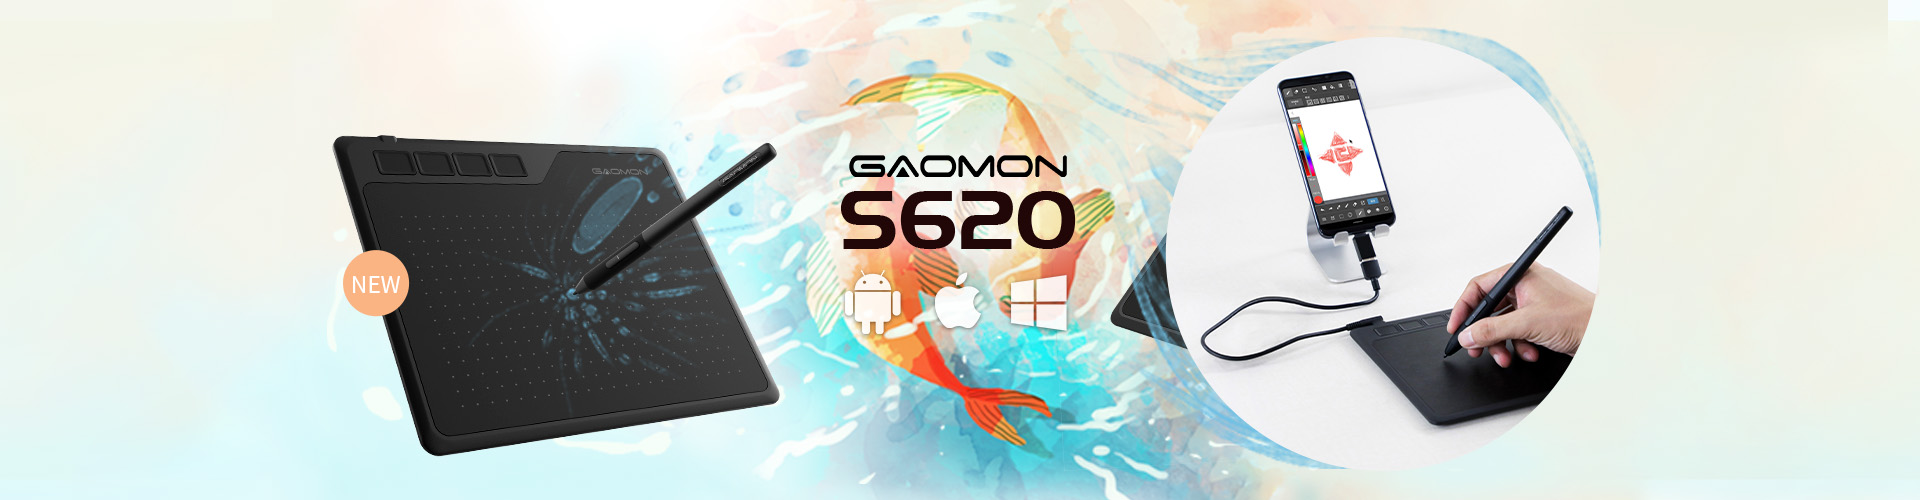 GAOMON Releases an Android Phone Compatible Tablet